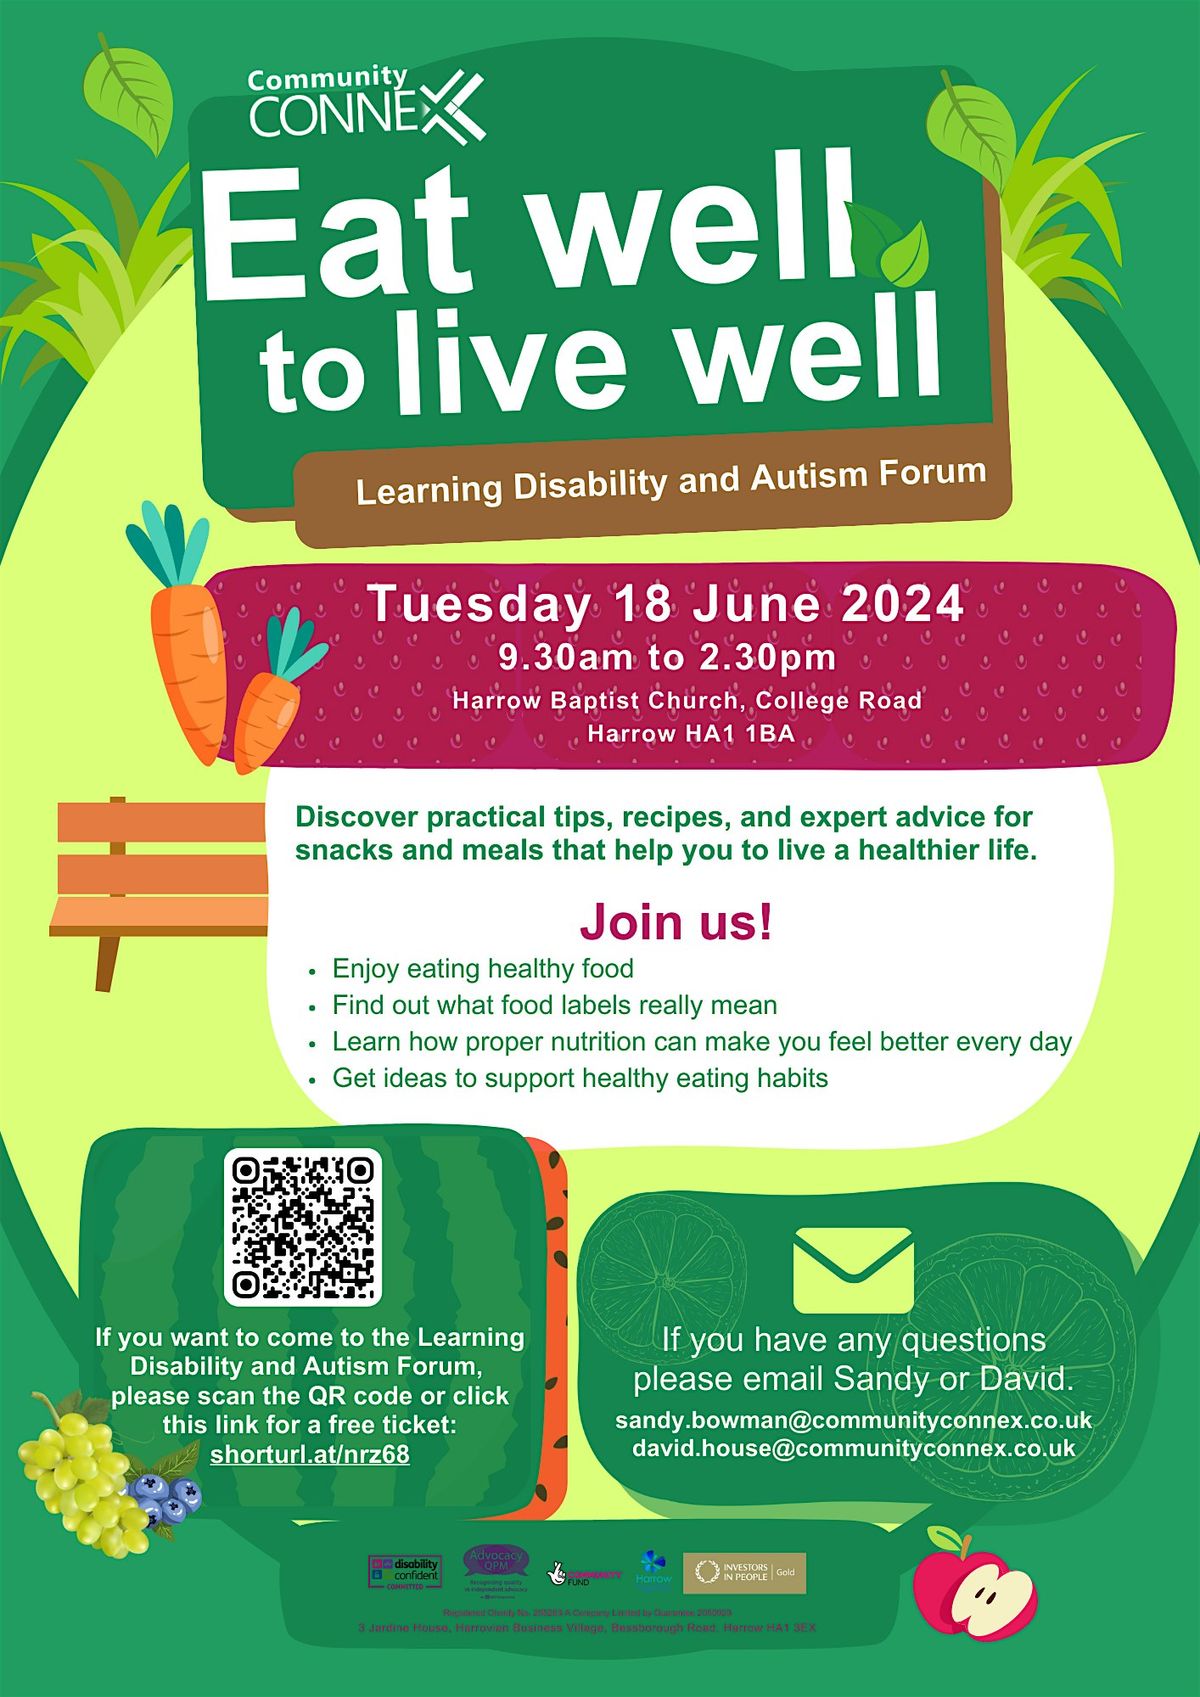 Learning Disability and Autism Forum: Eat well to live well